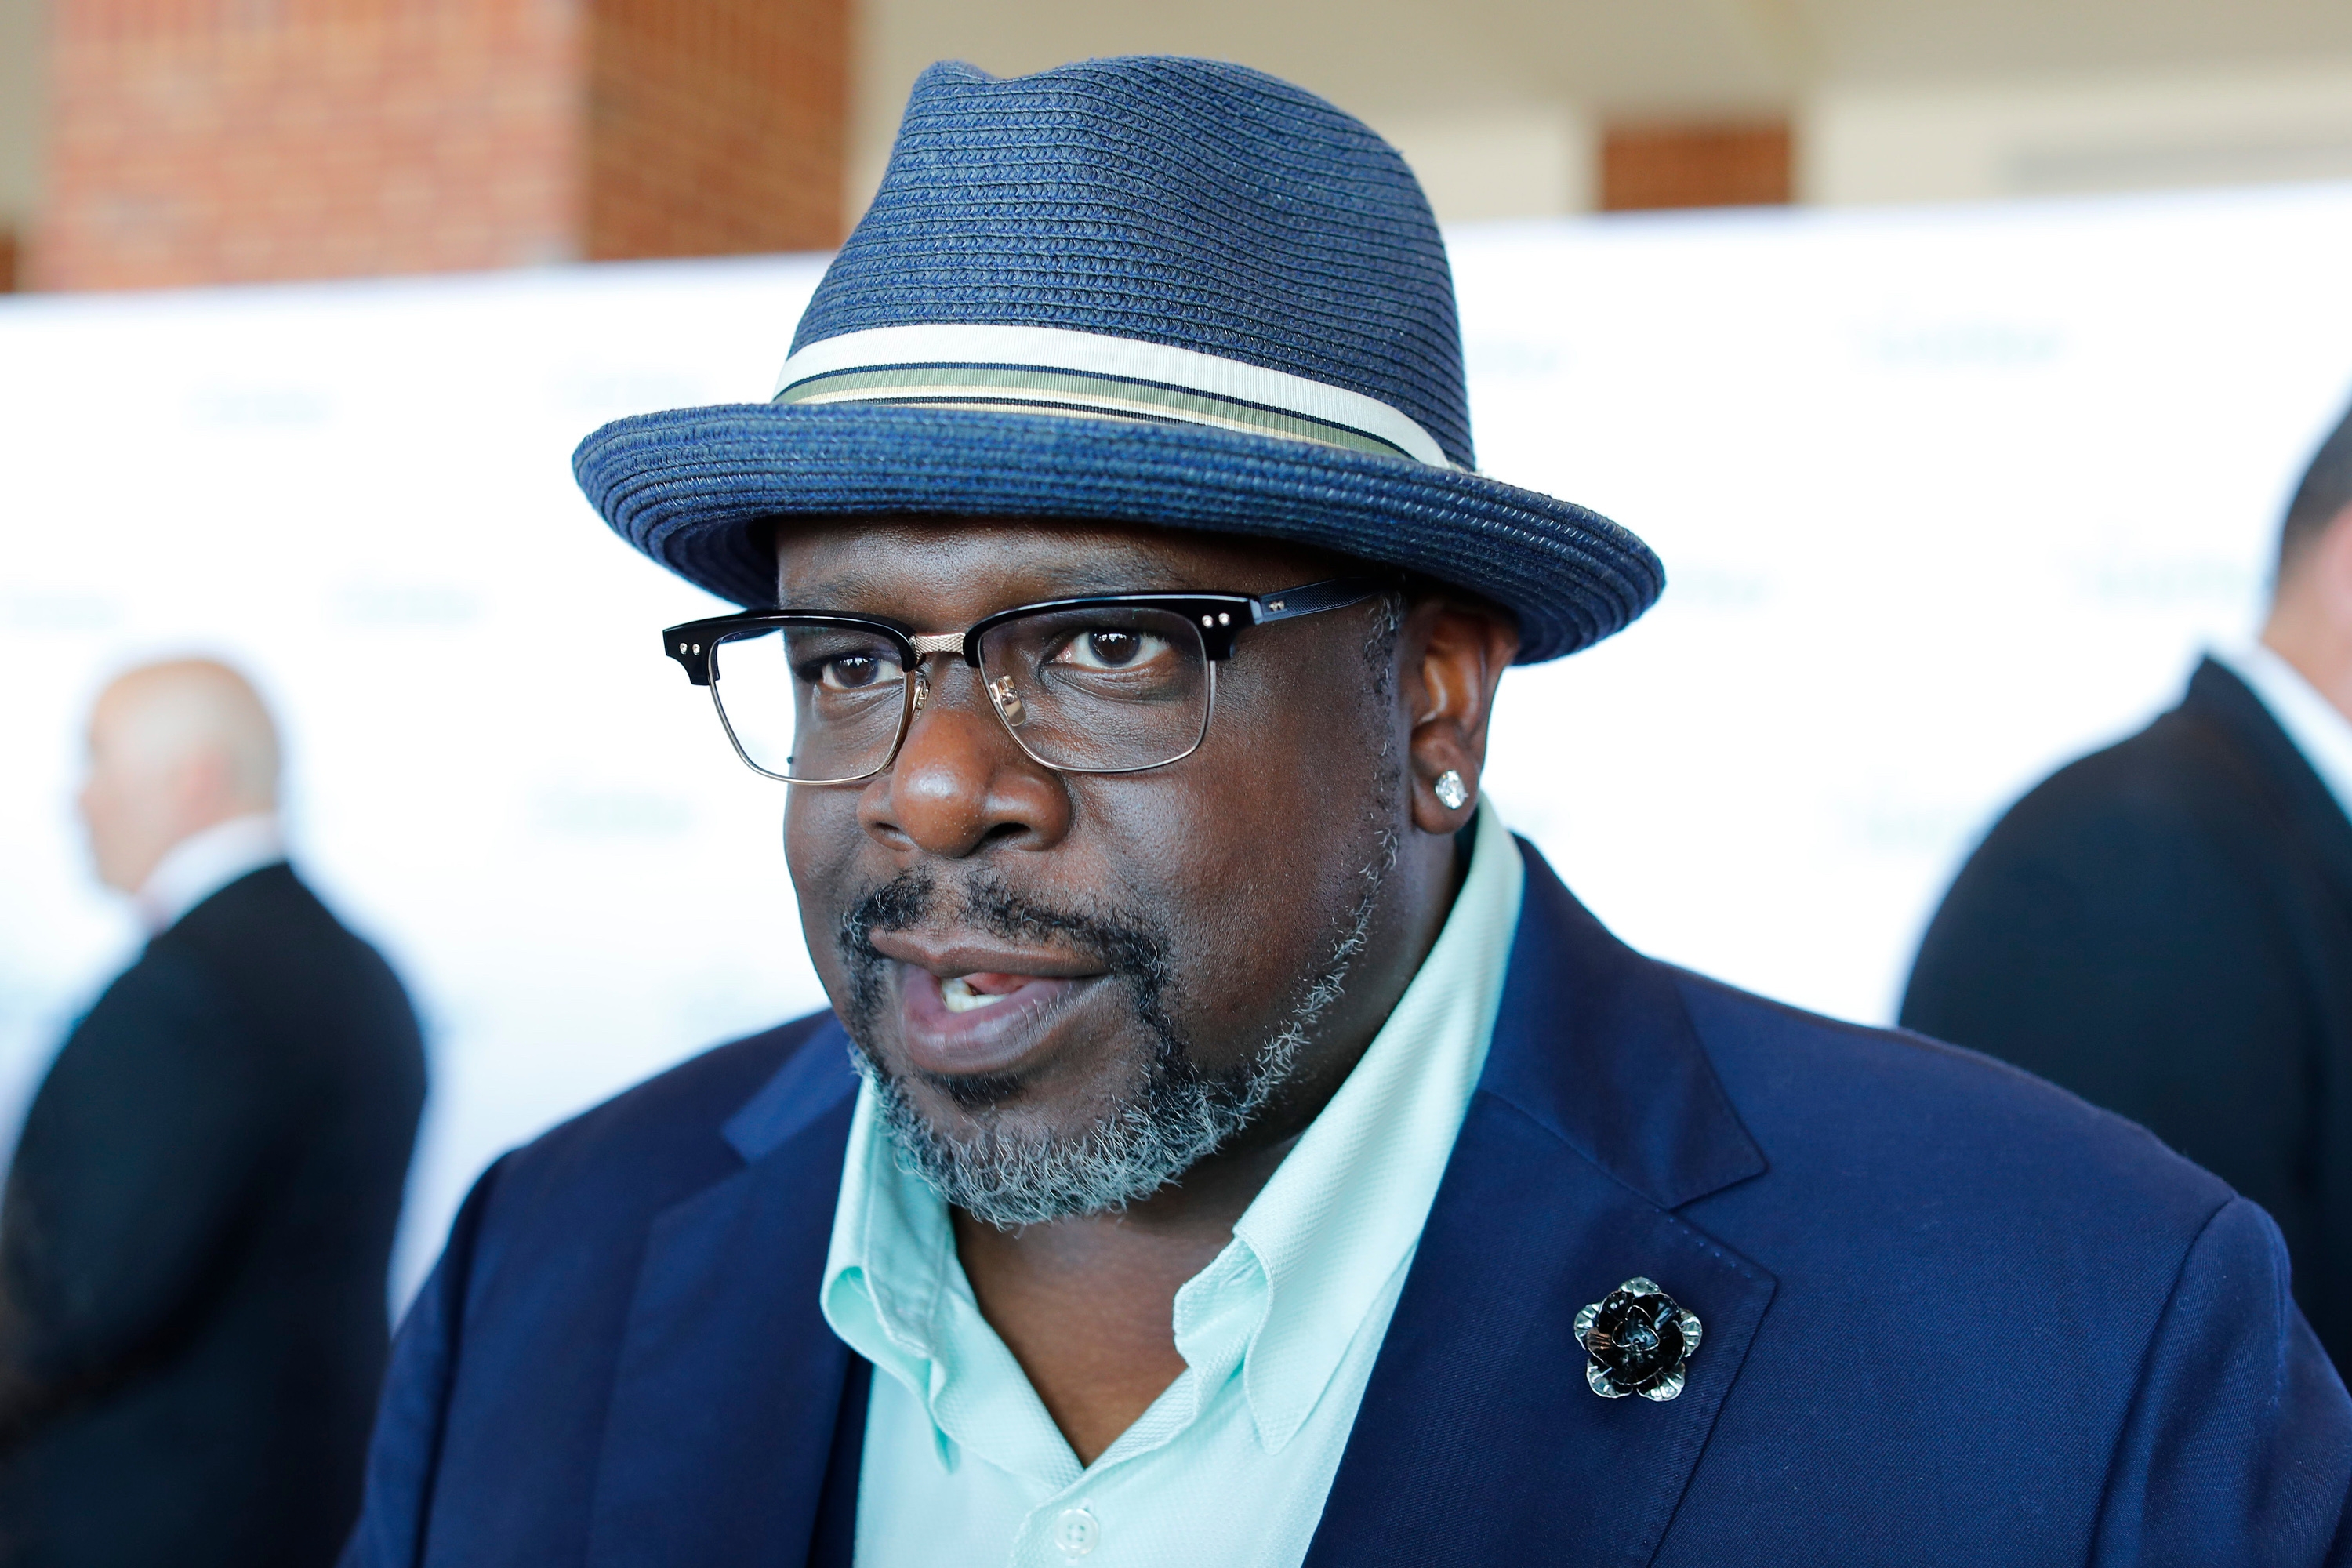 Cedric The Entertainer Preps For Oct 26 In Modesto…And Playing Ralph Abernathy On The Big Screen